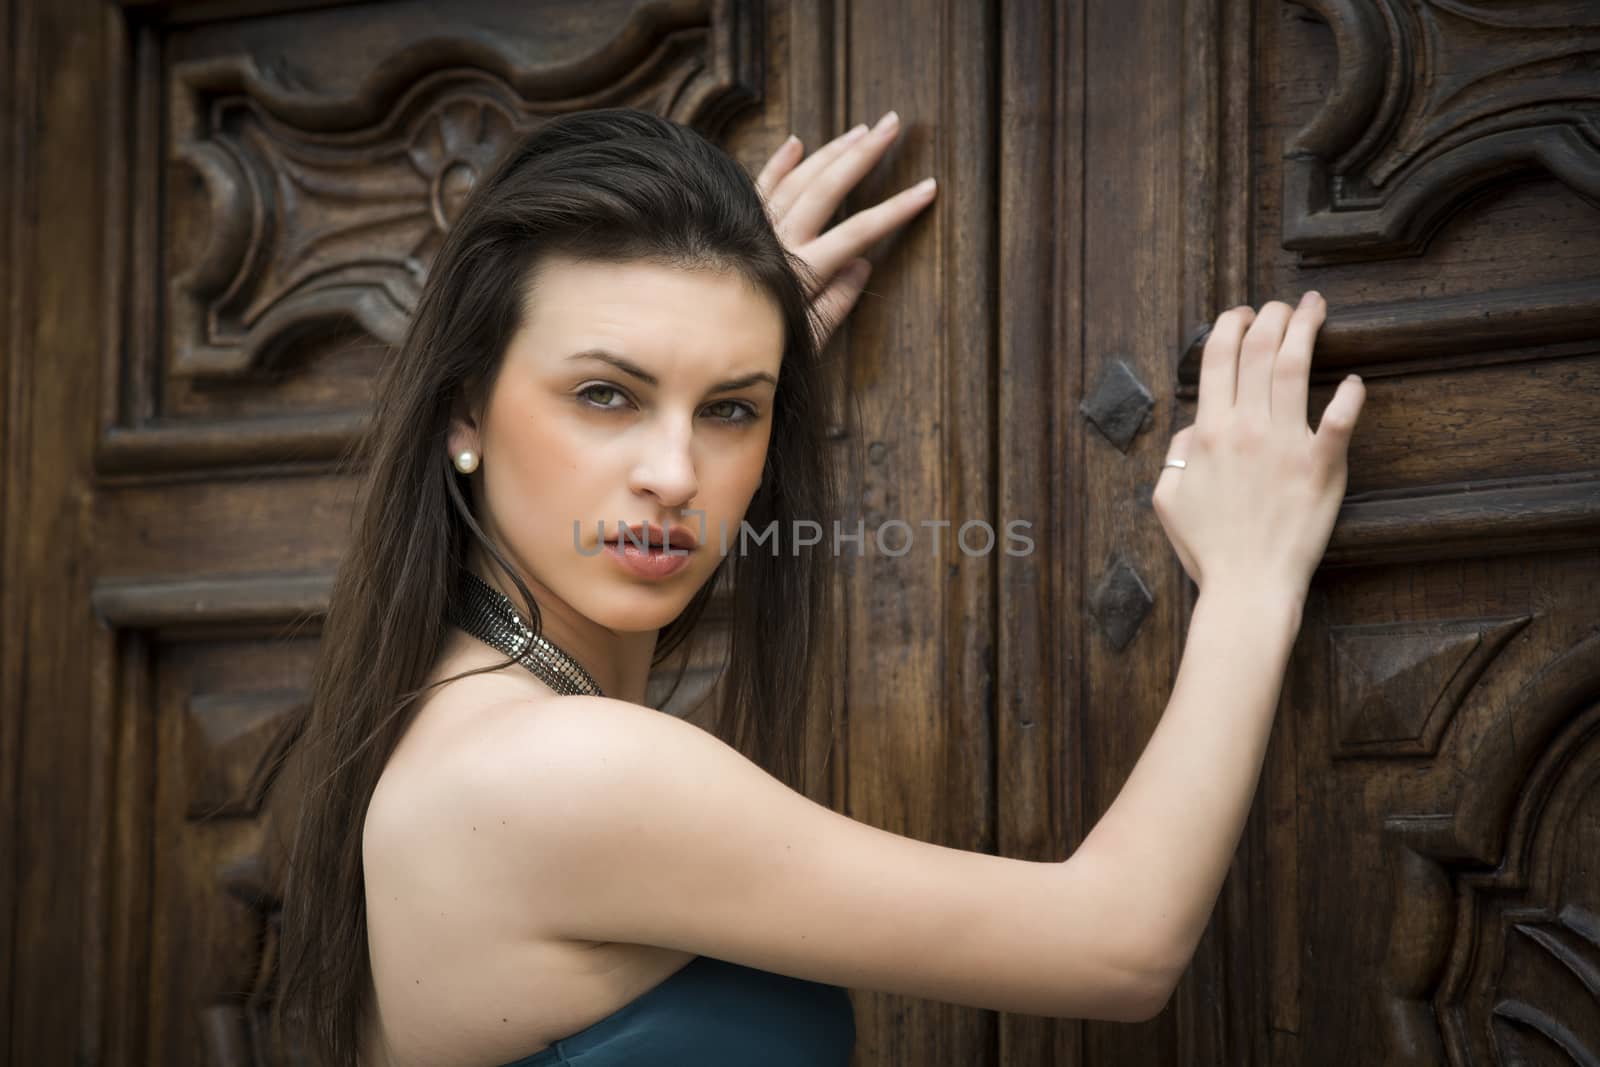 Pretty brunette girl outdoors with elegant dress by artofphoto